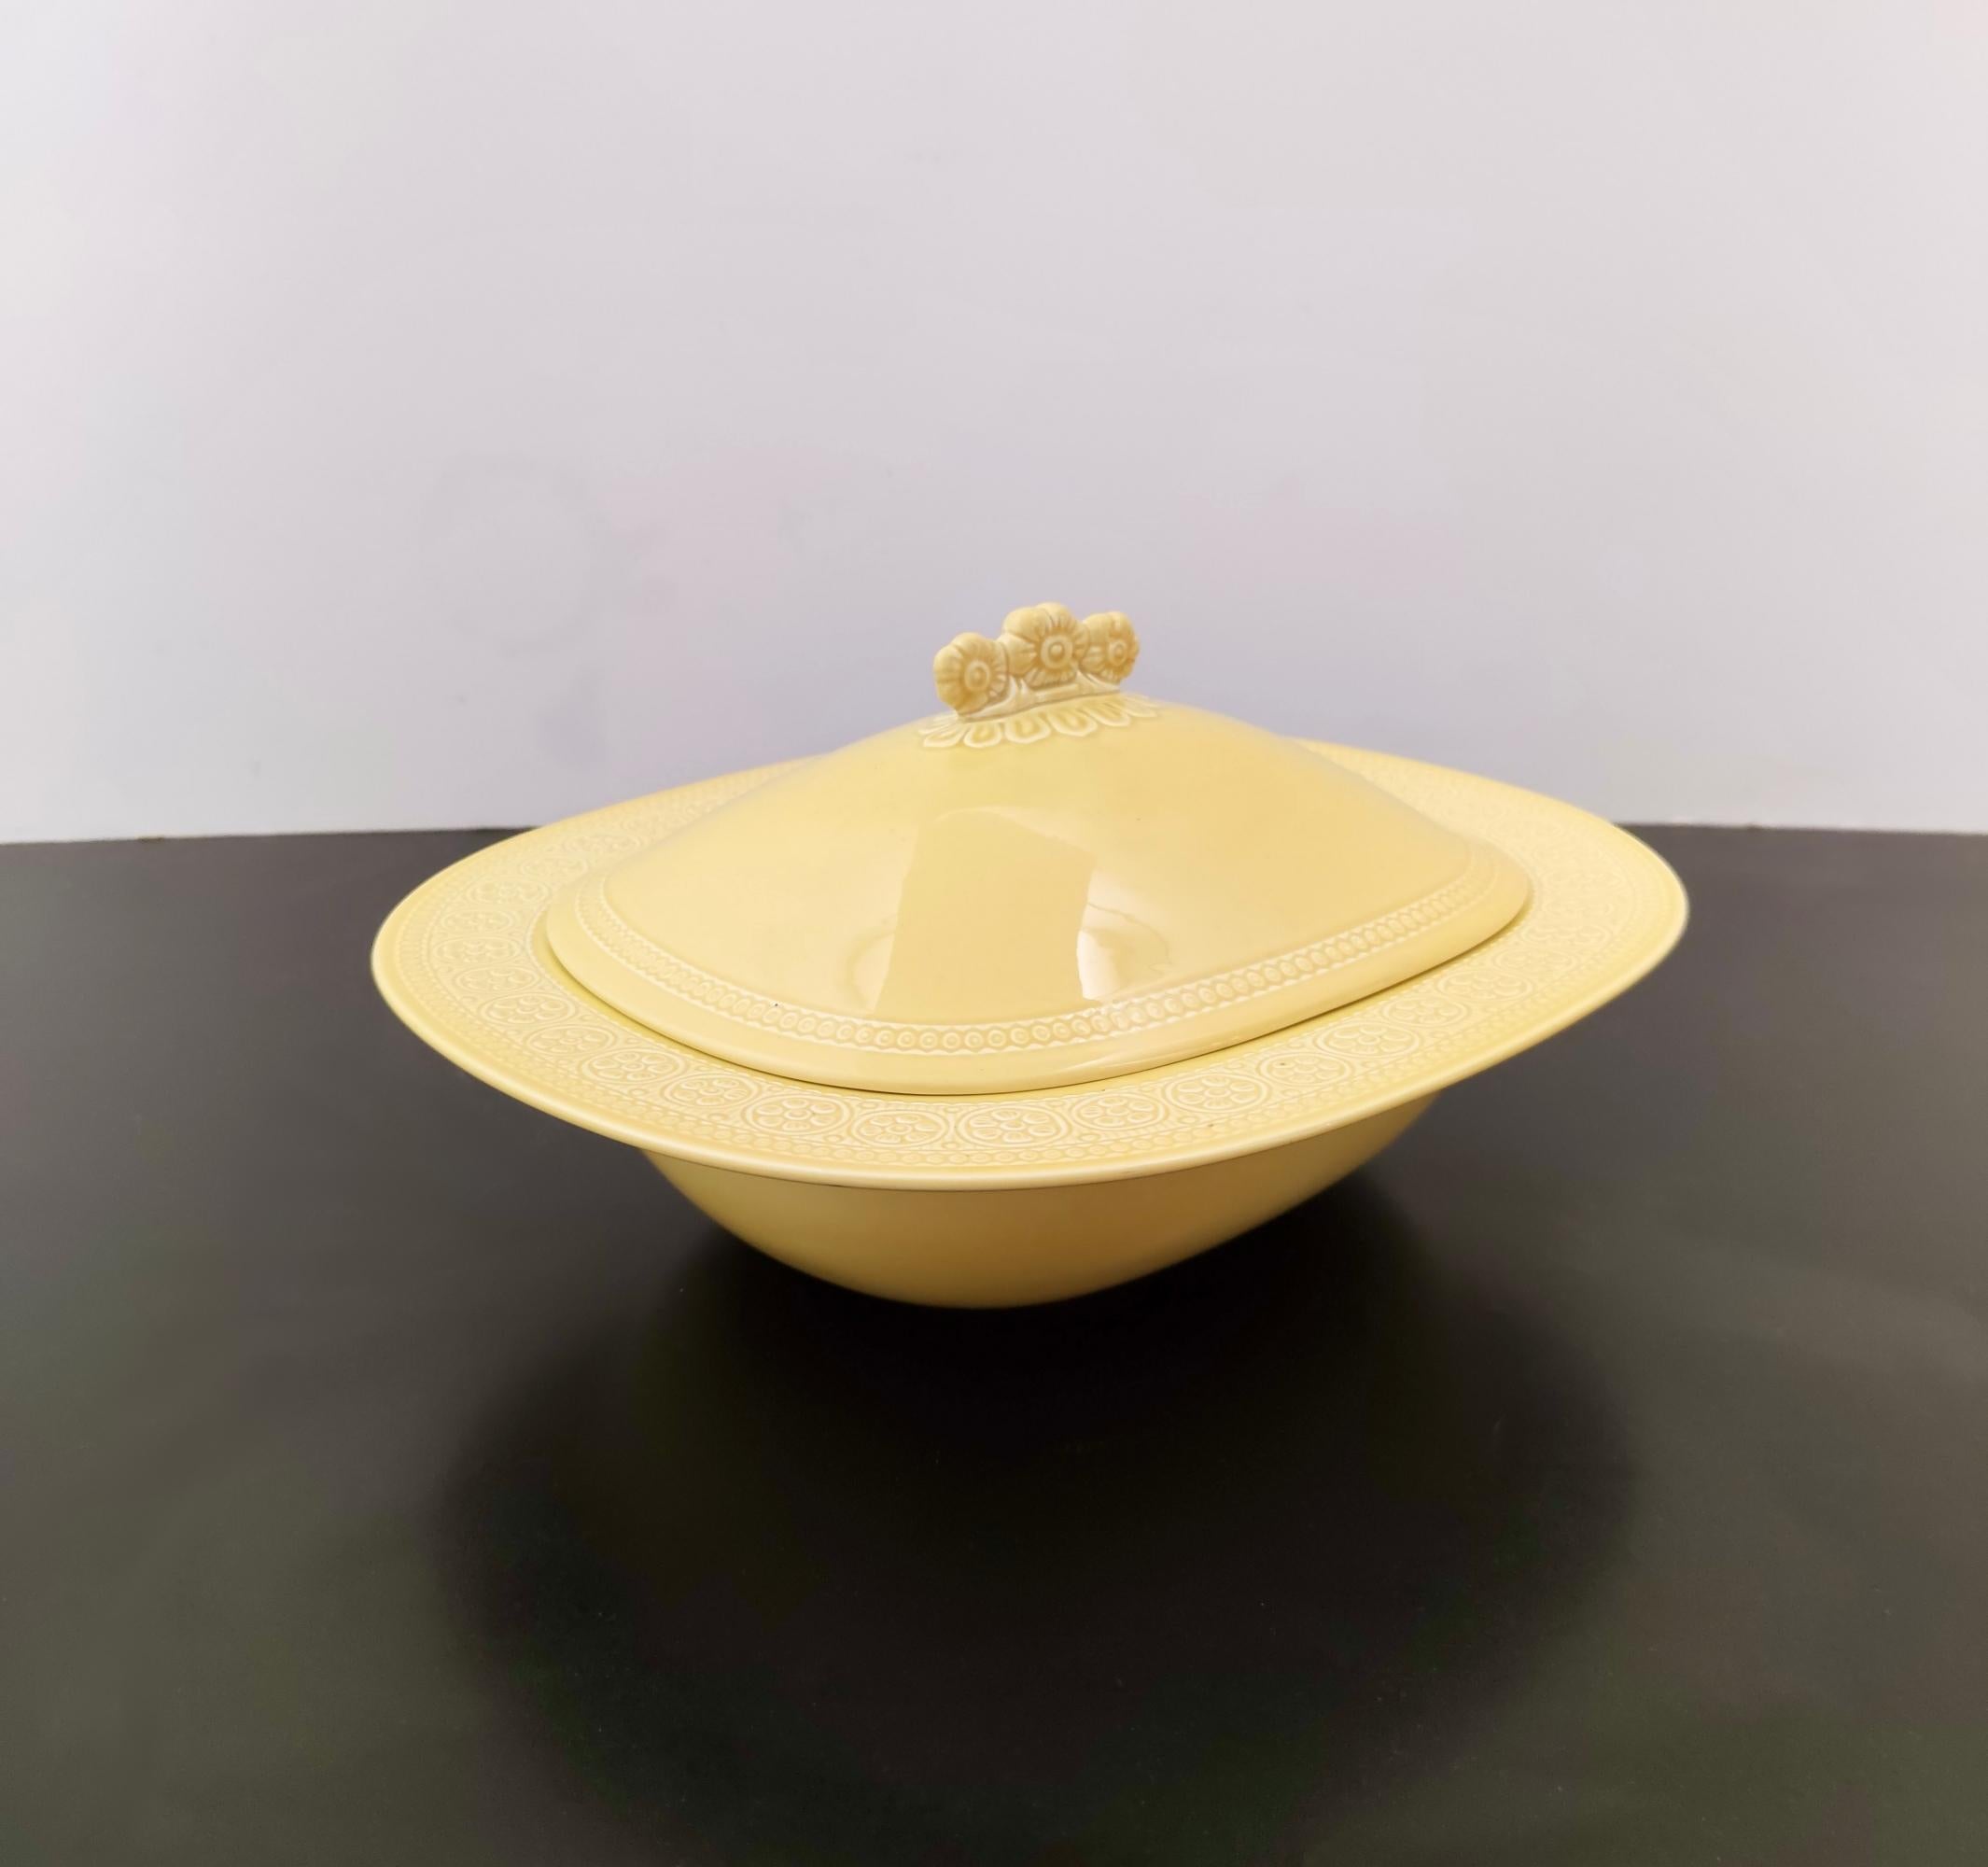 Made in Italy, 1965. 
This centerpiece bowl is made in yellow lacquered earthenware with bossed decorations.
This is a vintage item, therefore it might show slight traces of use, but it can be considered as in excellent original condition.

Width: